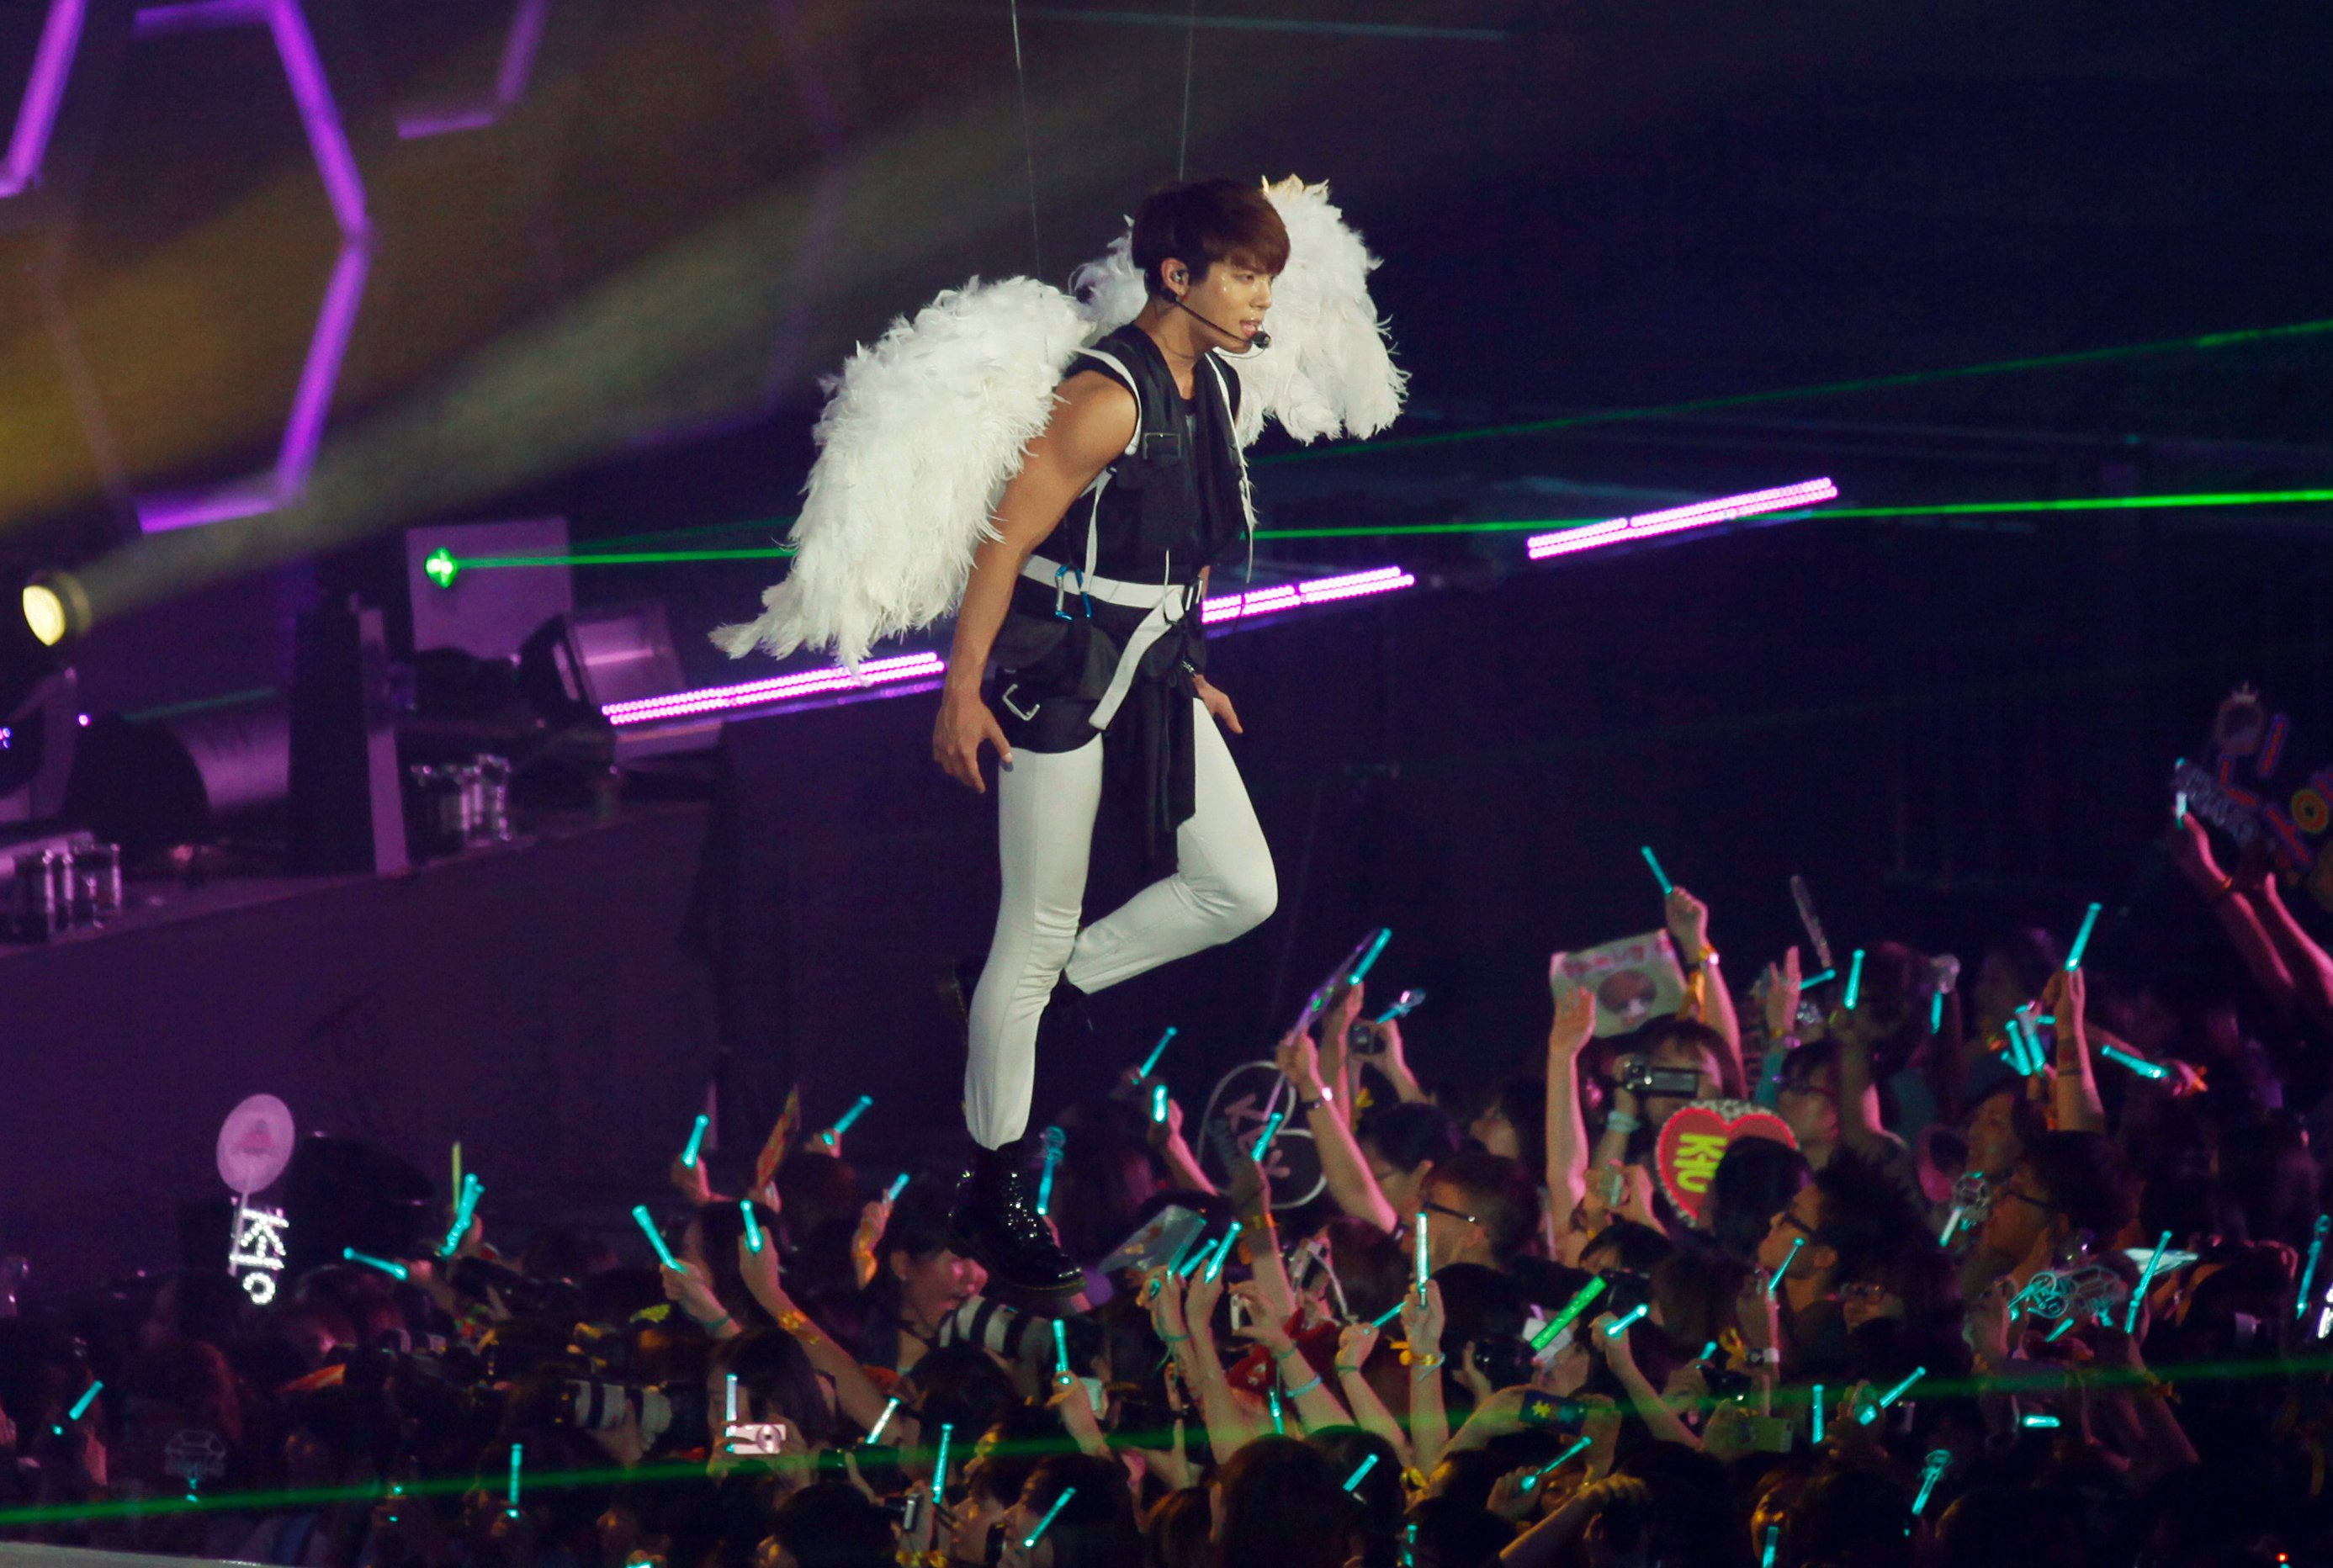 Kim Jong-hyun, better known by the stage name Jonghyun, performed in Hong Kong in 2012.